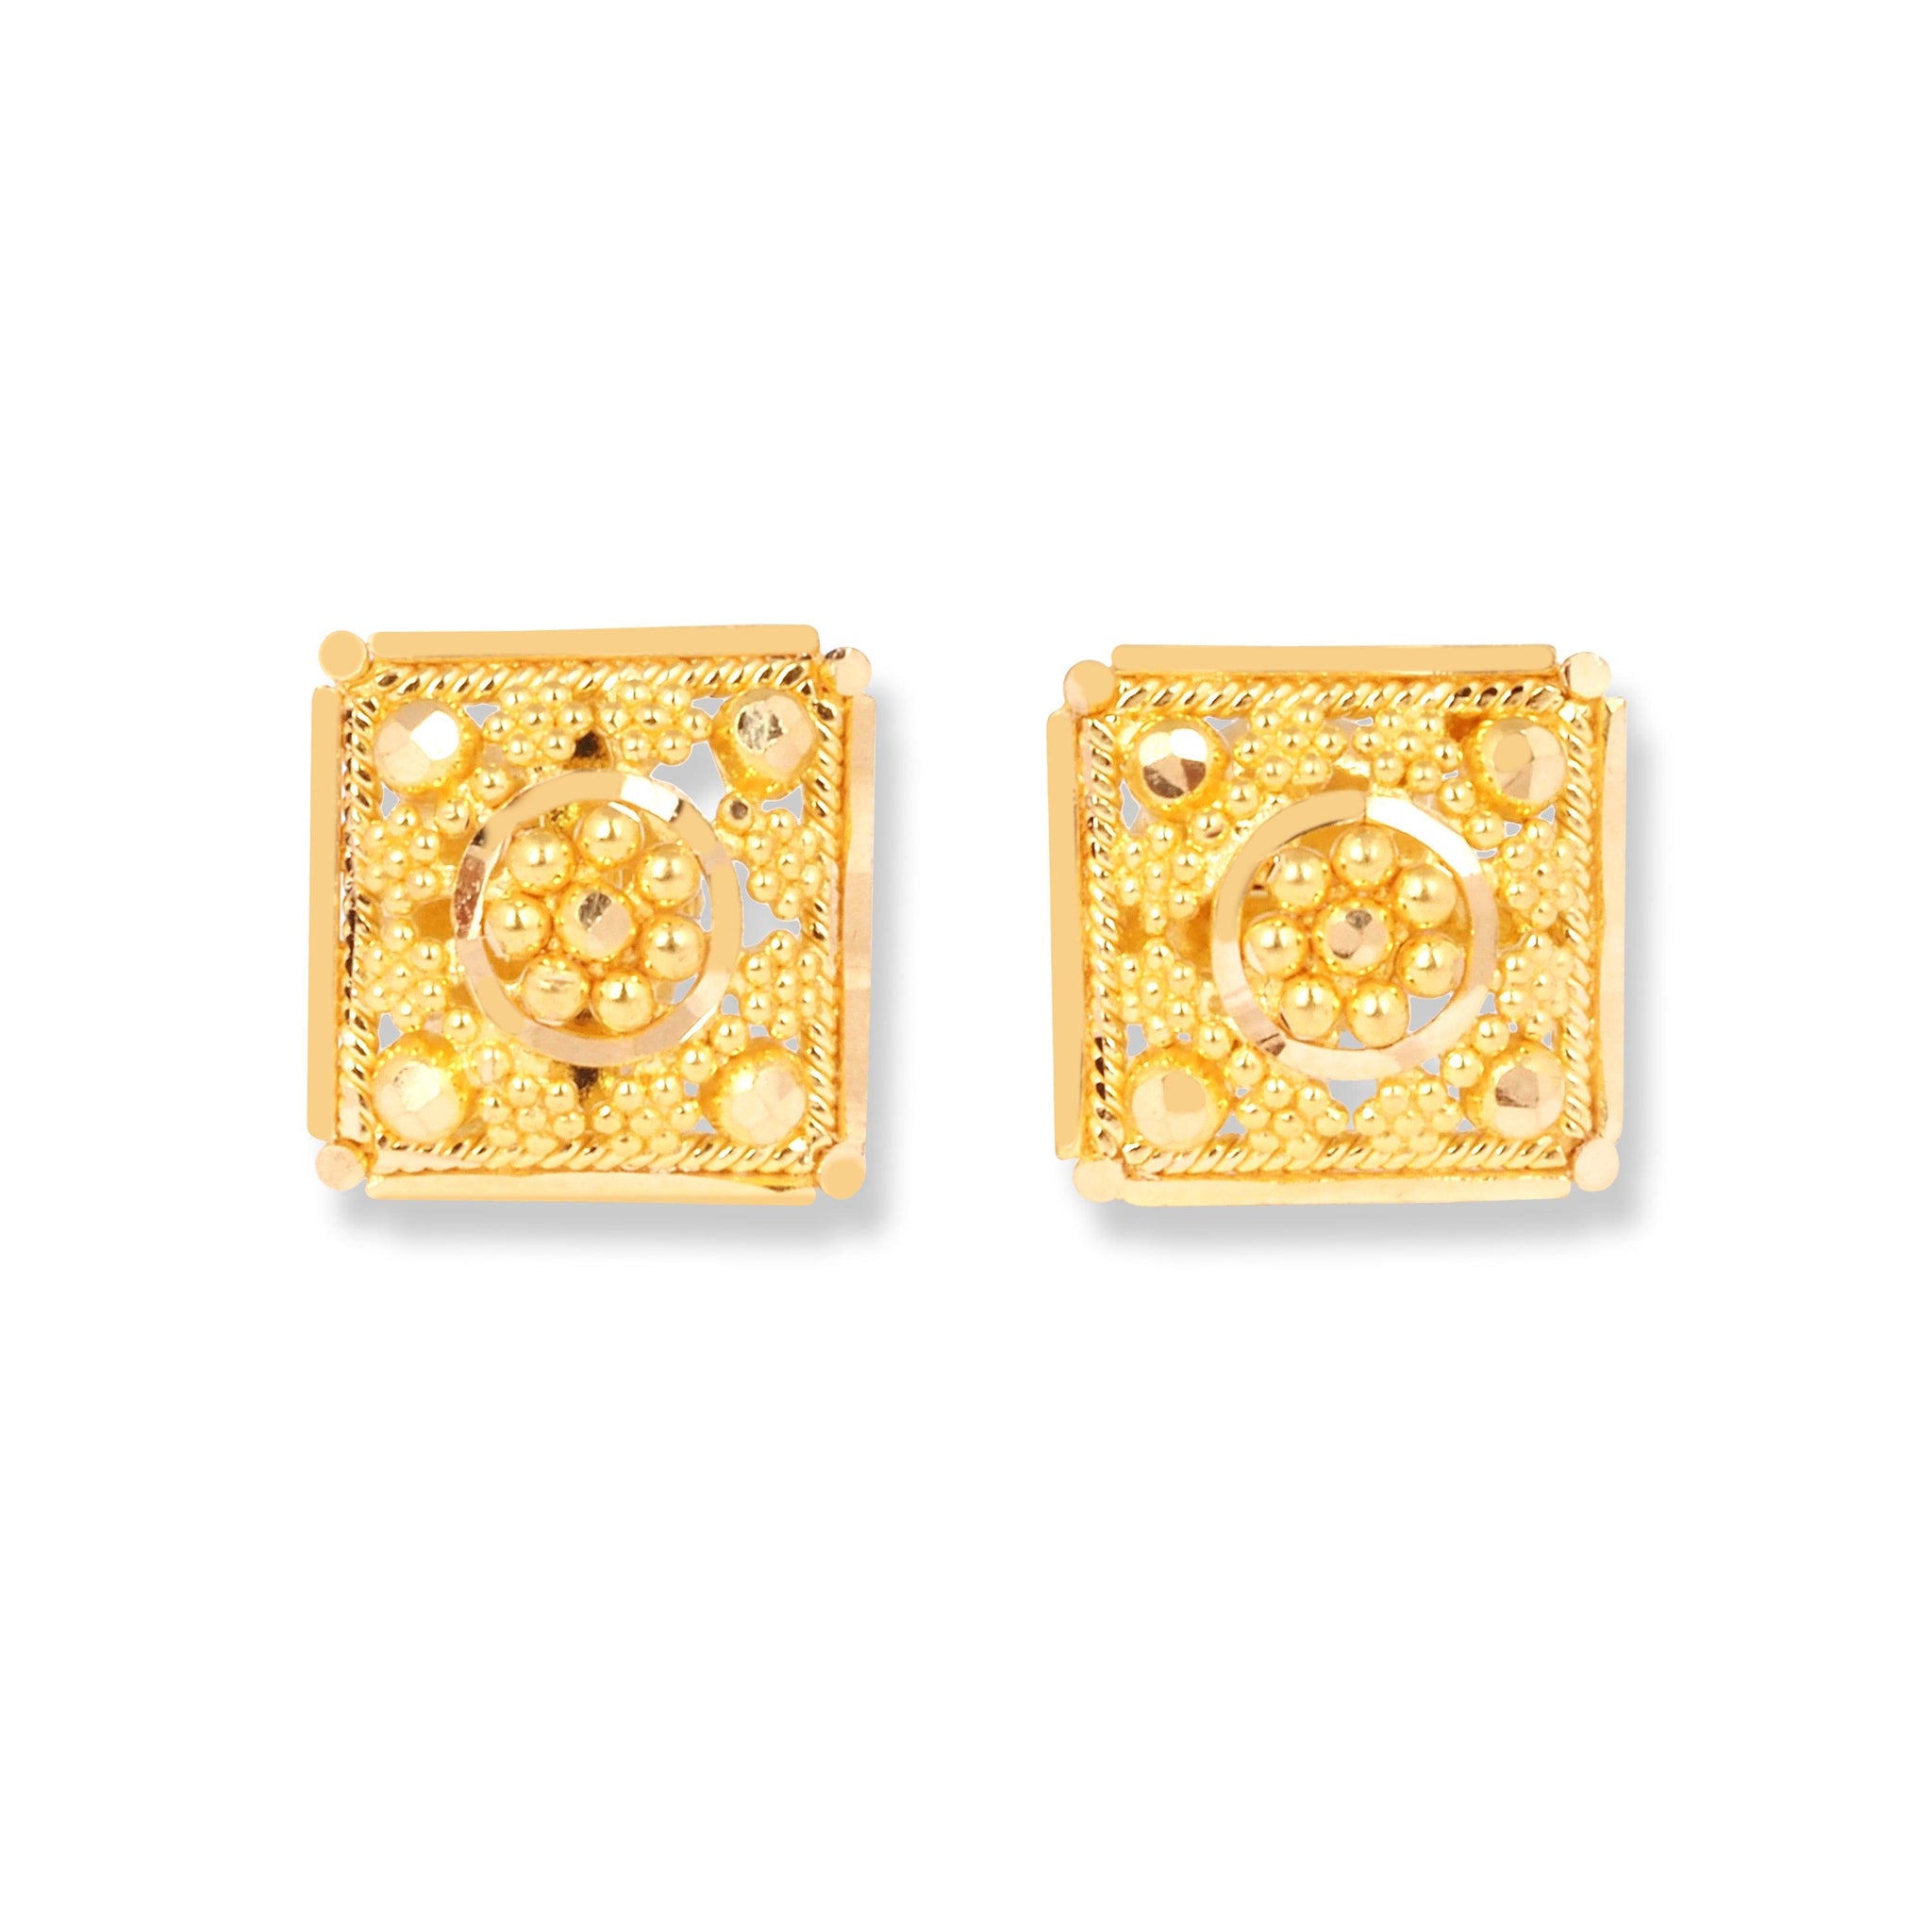 22ct Gold Earrings with Filigree Design (4.3g) E-7881